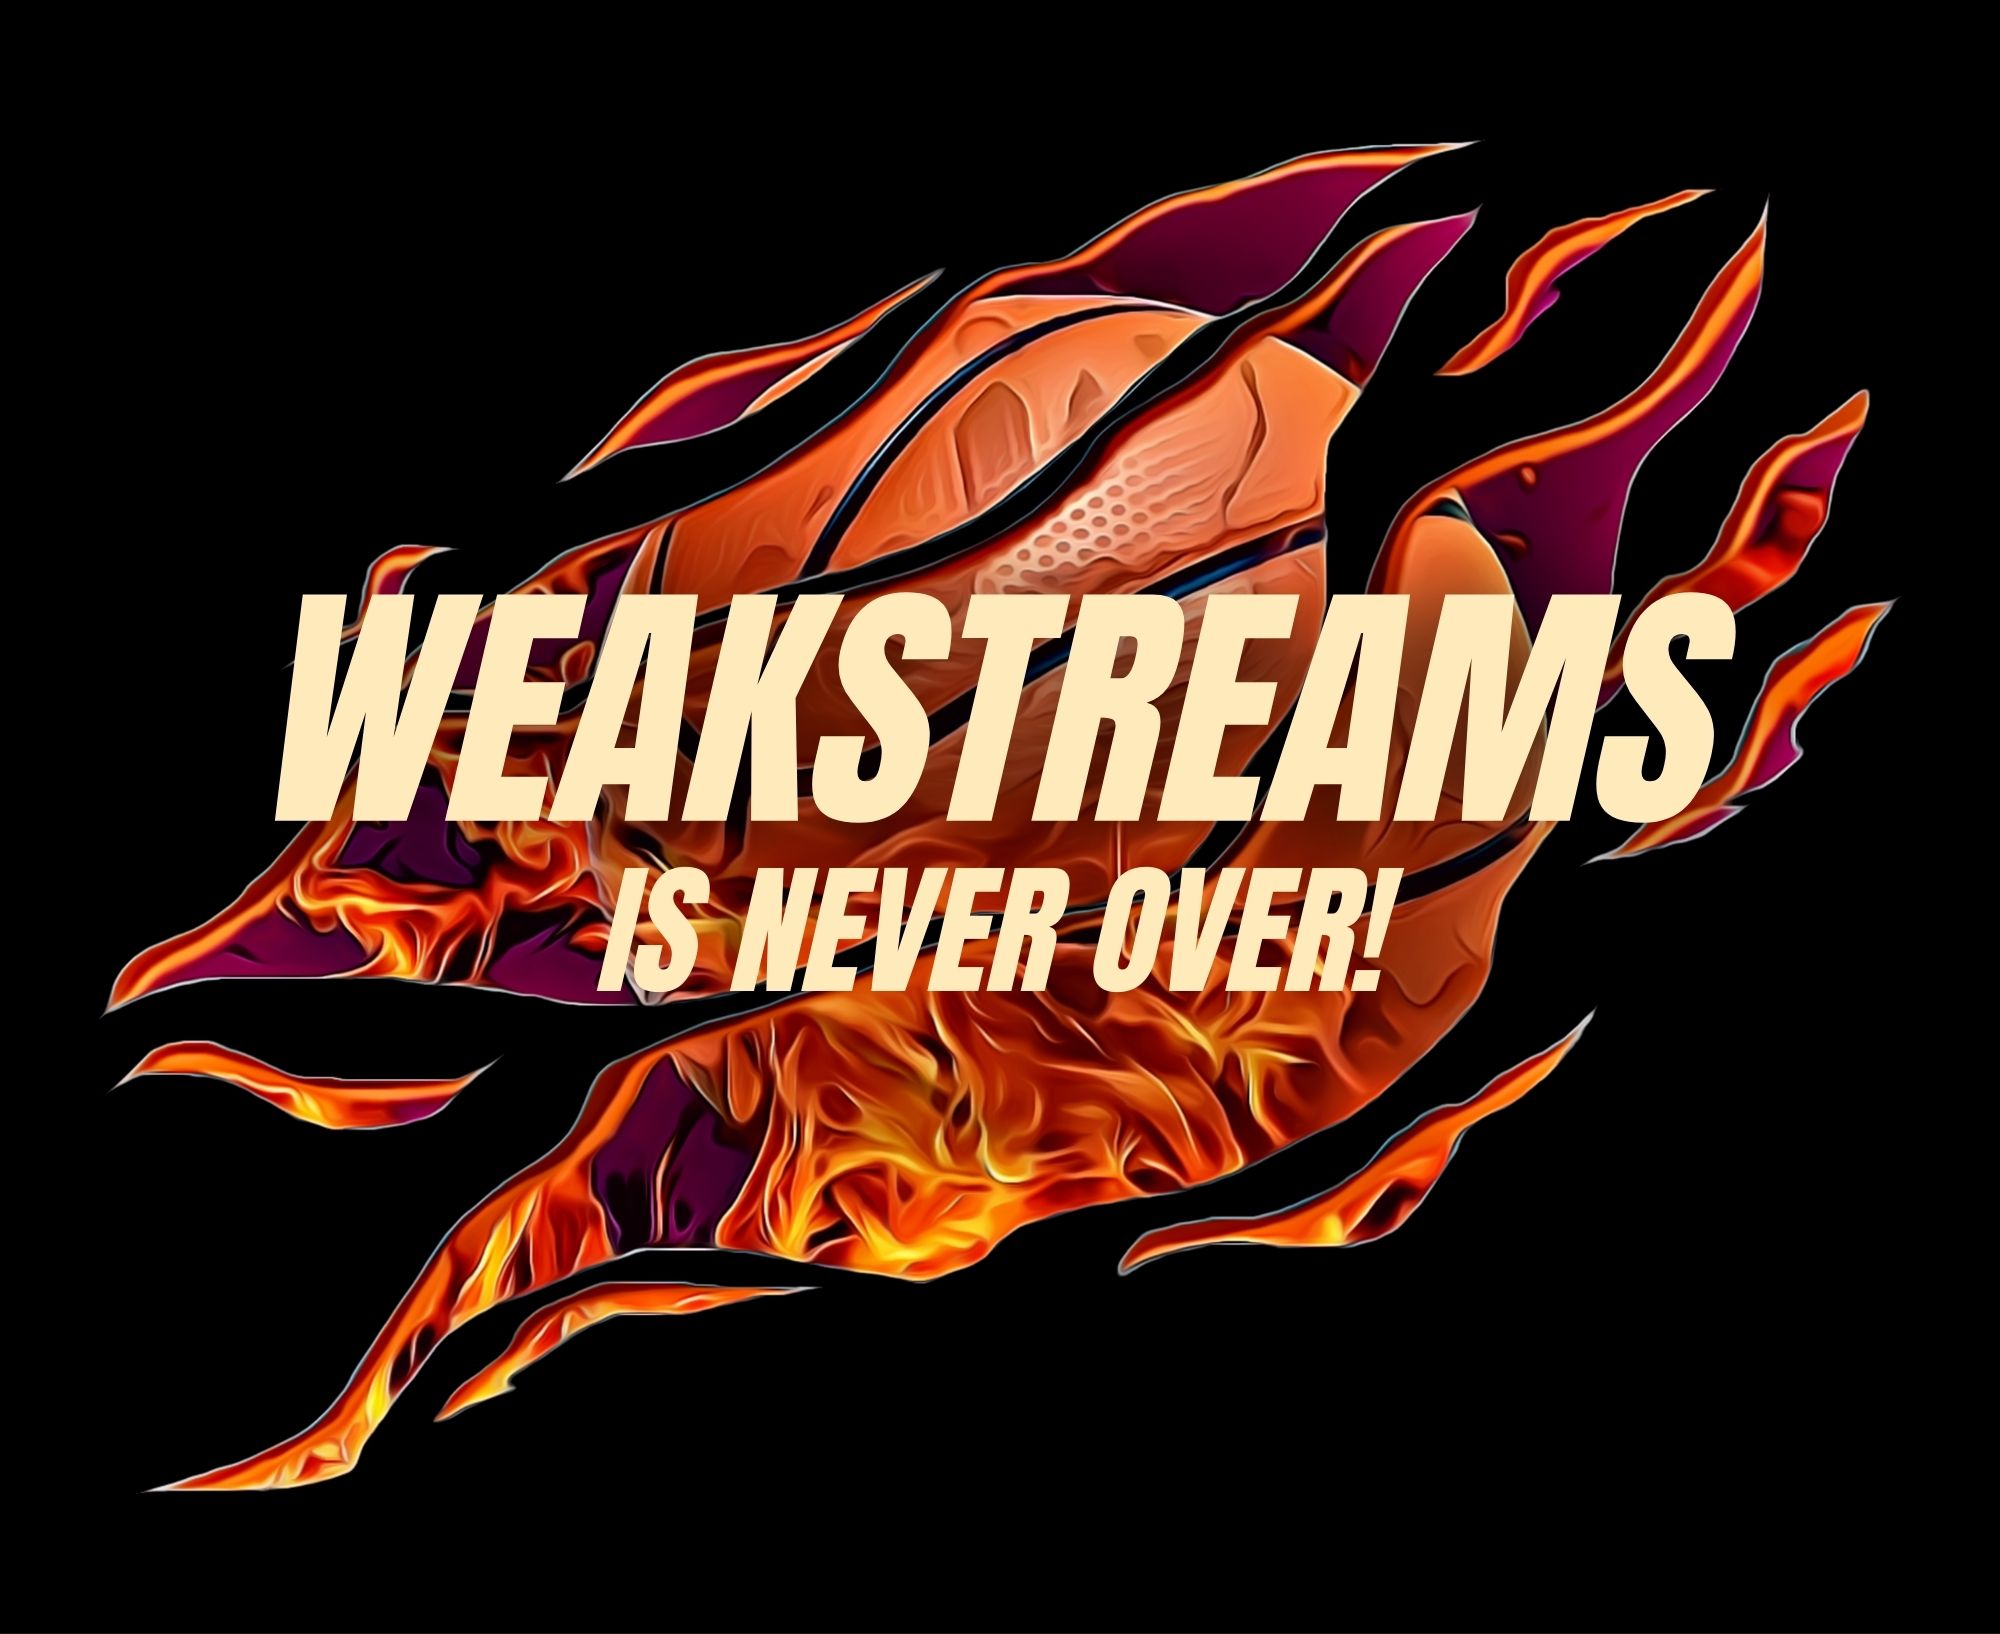 Sports Streaming Made Easy How to Get the Most Out of WeakStreams Gamers